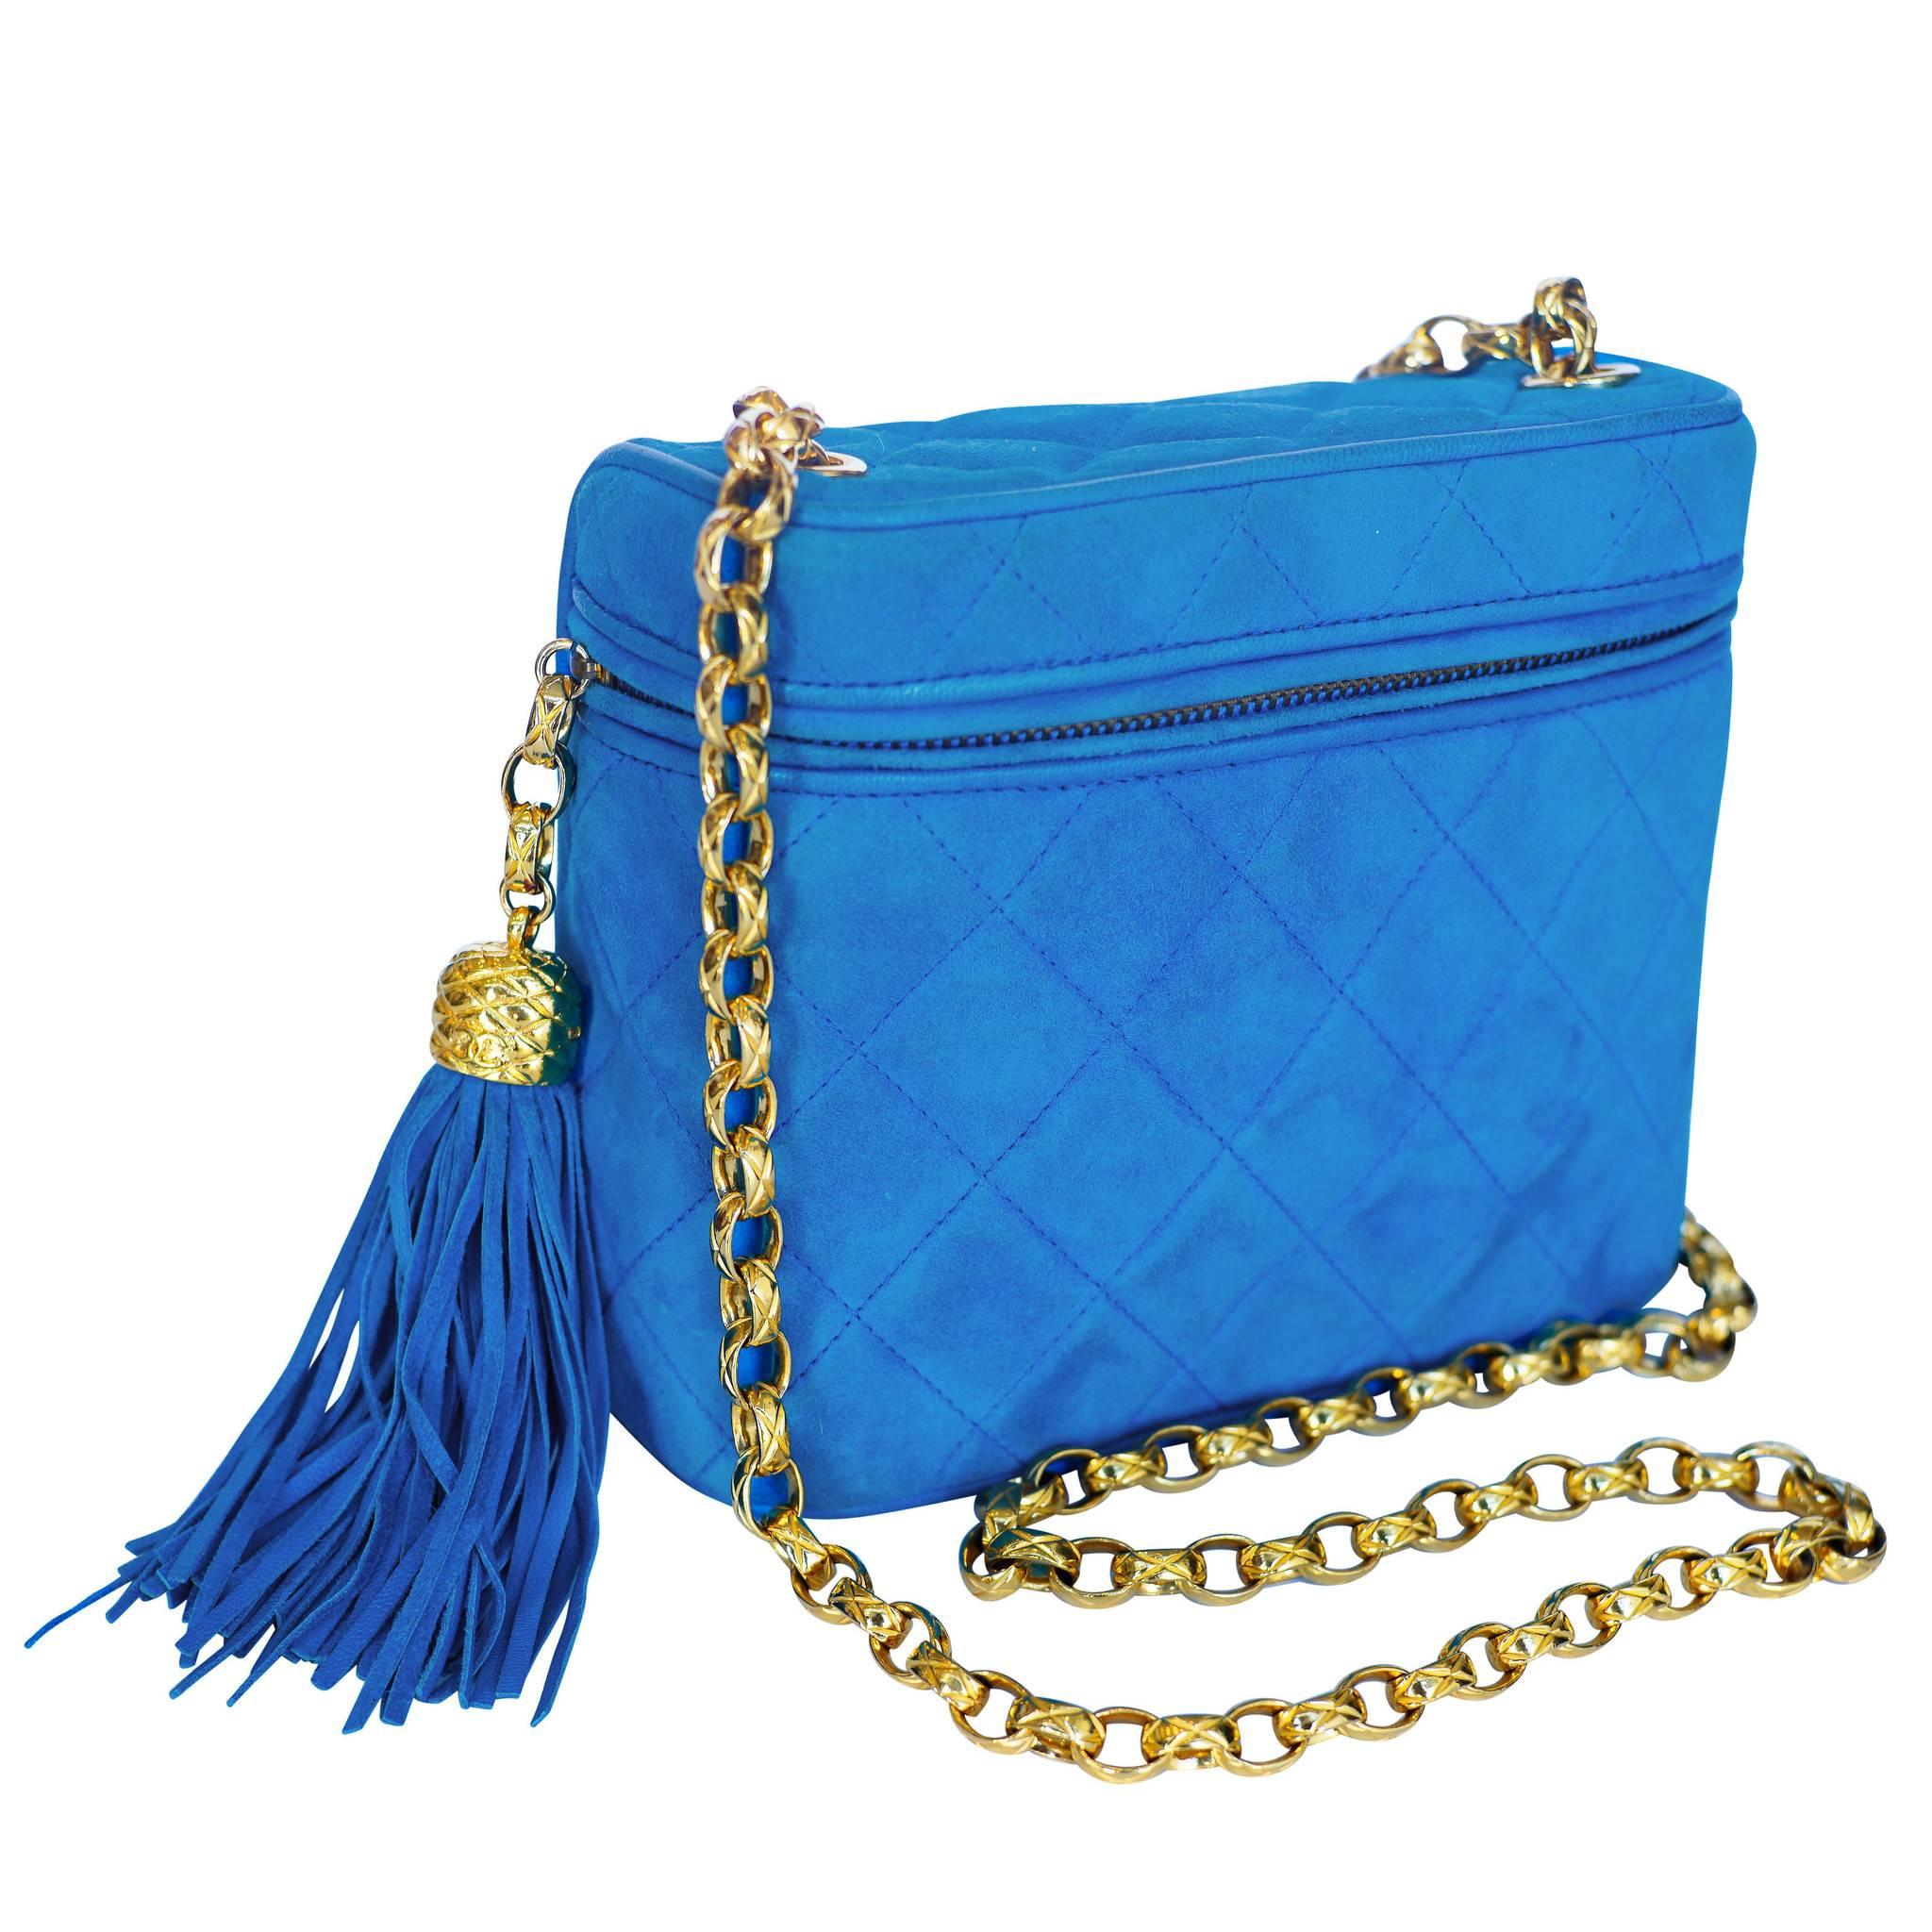 Limited edition Channel blue suede shoulder bag with beige leather interior. This shoulder bag comes with a small zipper pocket side along and a back pocket. The blue suede tassel zipper finishes off the piece.

-Measurements-
length: 7